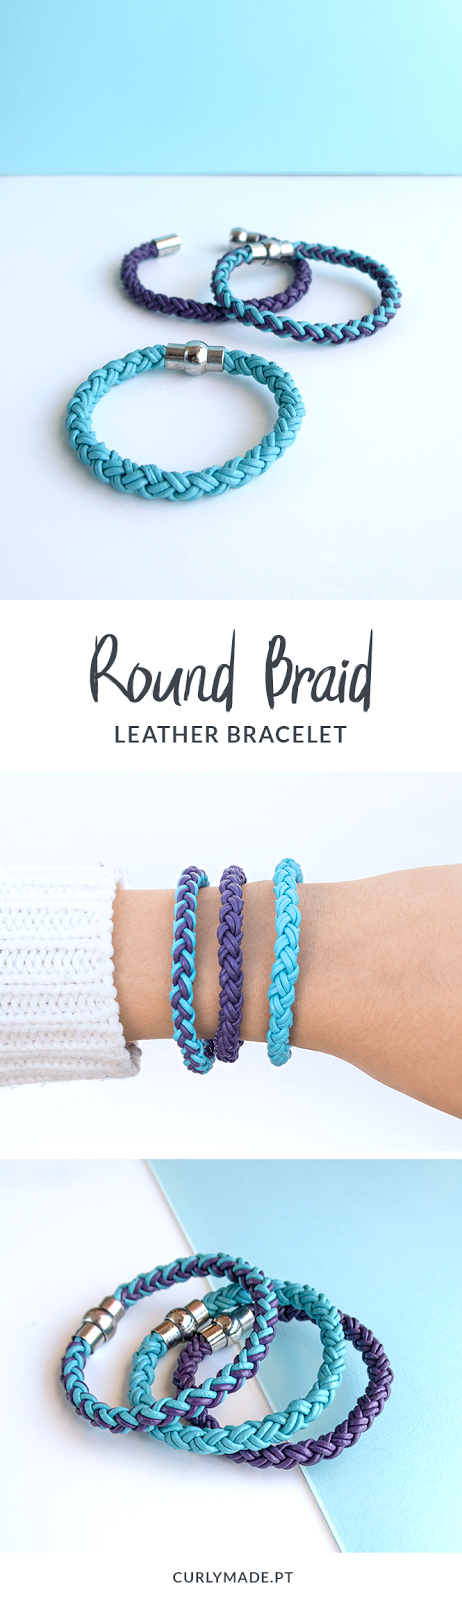 Leather Craft] How to make a Braided Leather Bracelet - YouTube